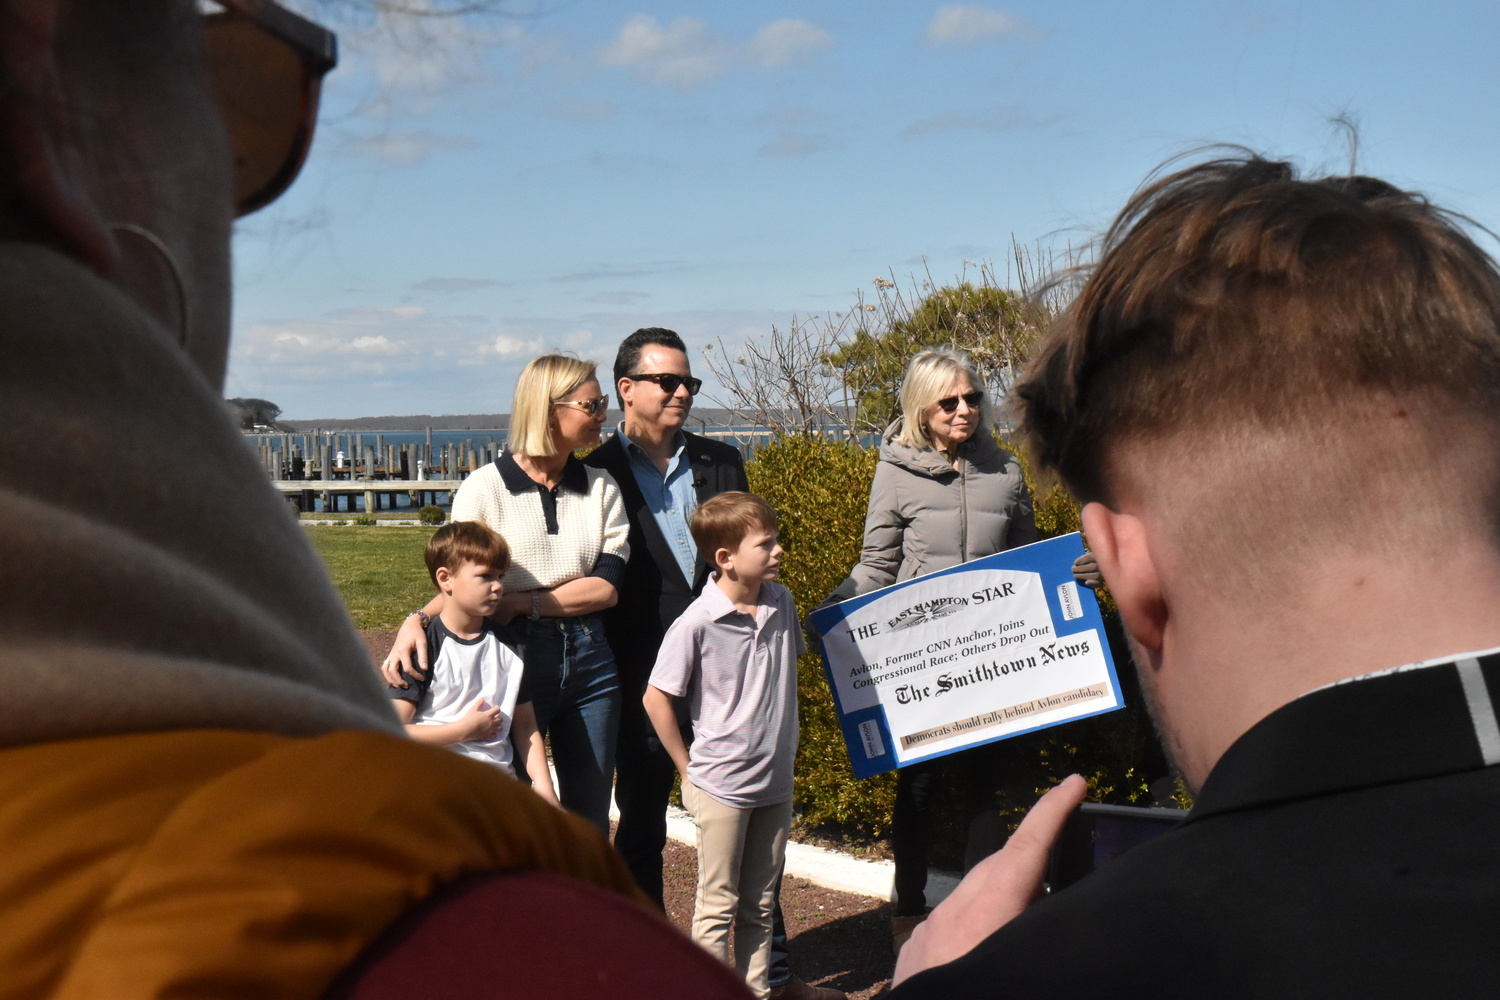 Former CNN anchor and author John Avlon, who kicked off his congressional campaign with a rally in Marine Park in Sag Harbor on Saturday, waits with his wife Margaret Hoover and children to be introduced.  STEPHEN J. KOTZ